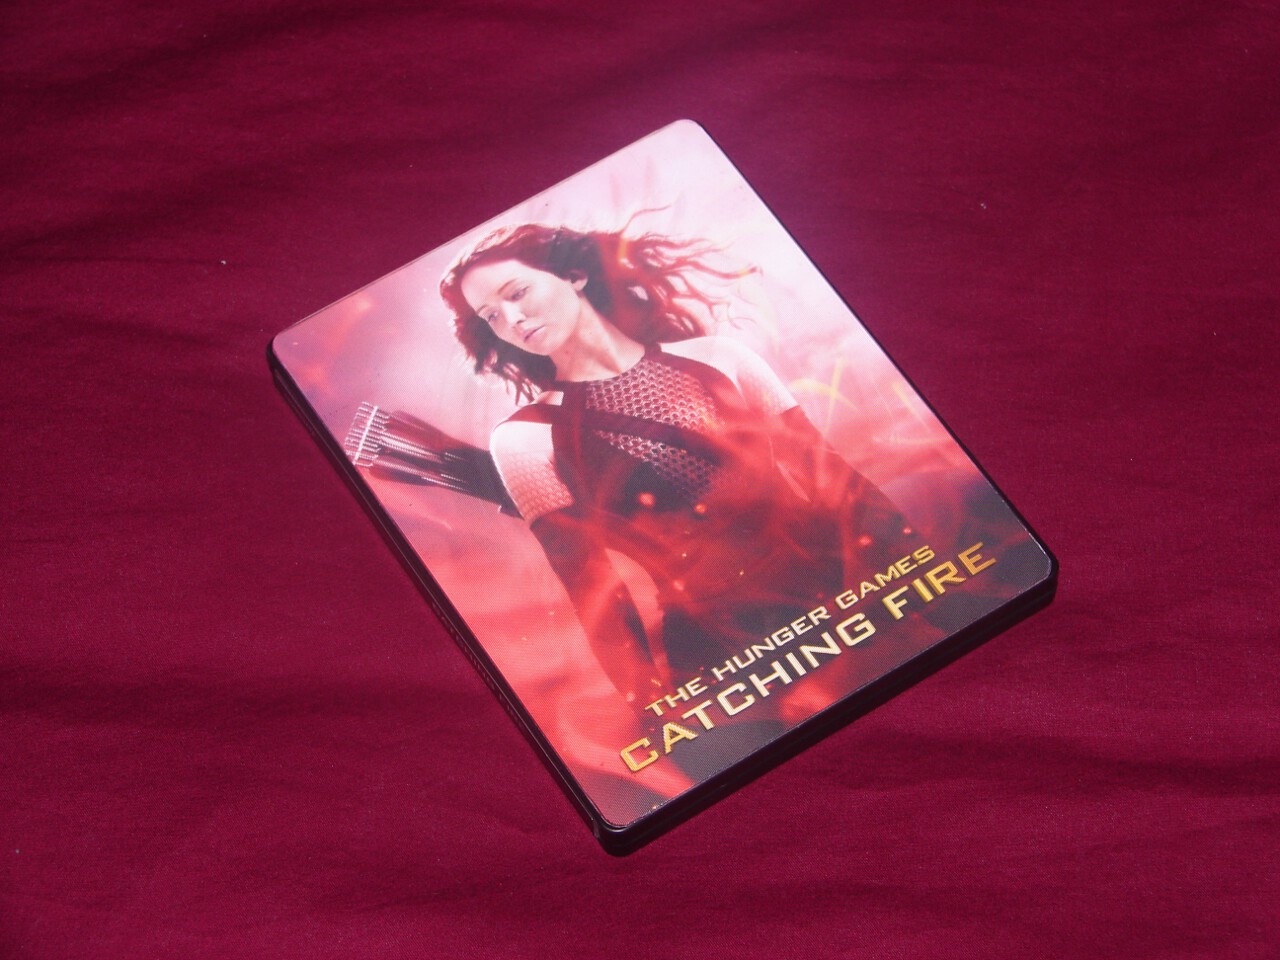 The Hunger Games - Catching Fire (Custom Printed)